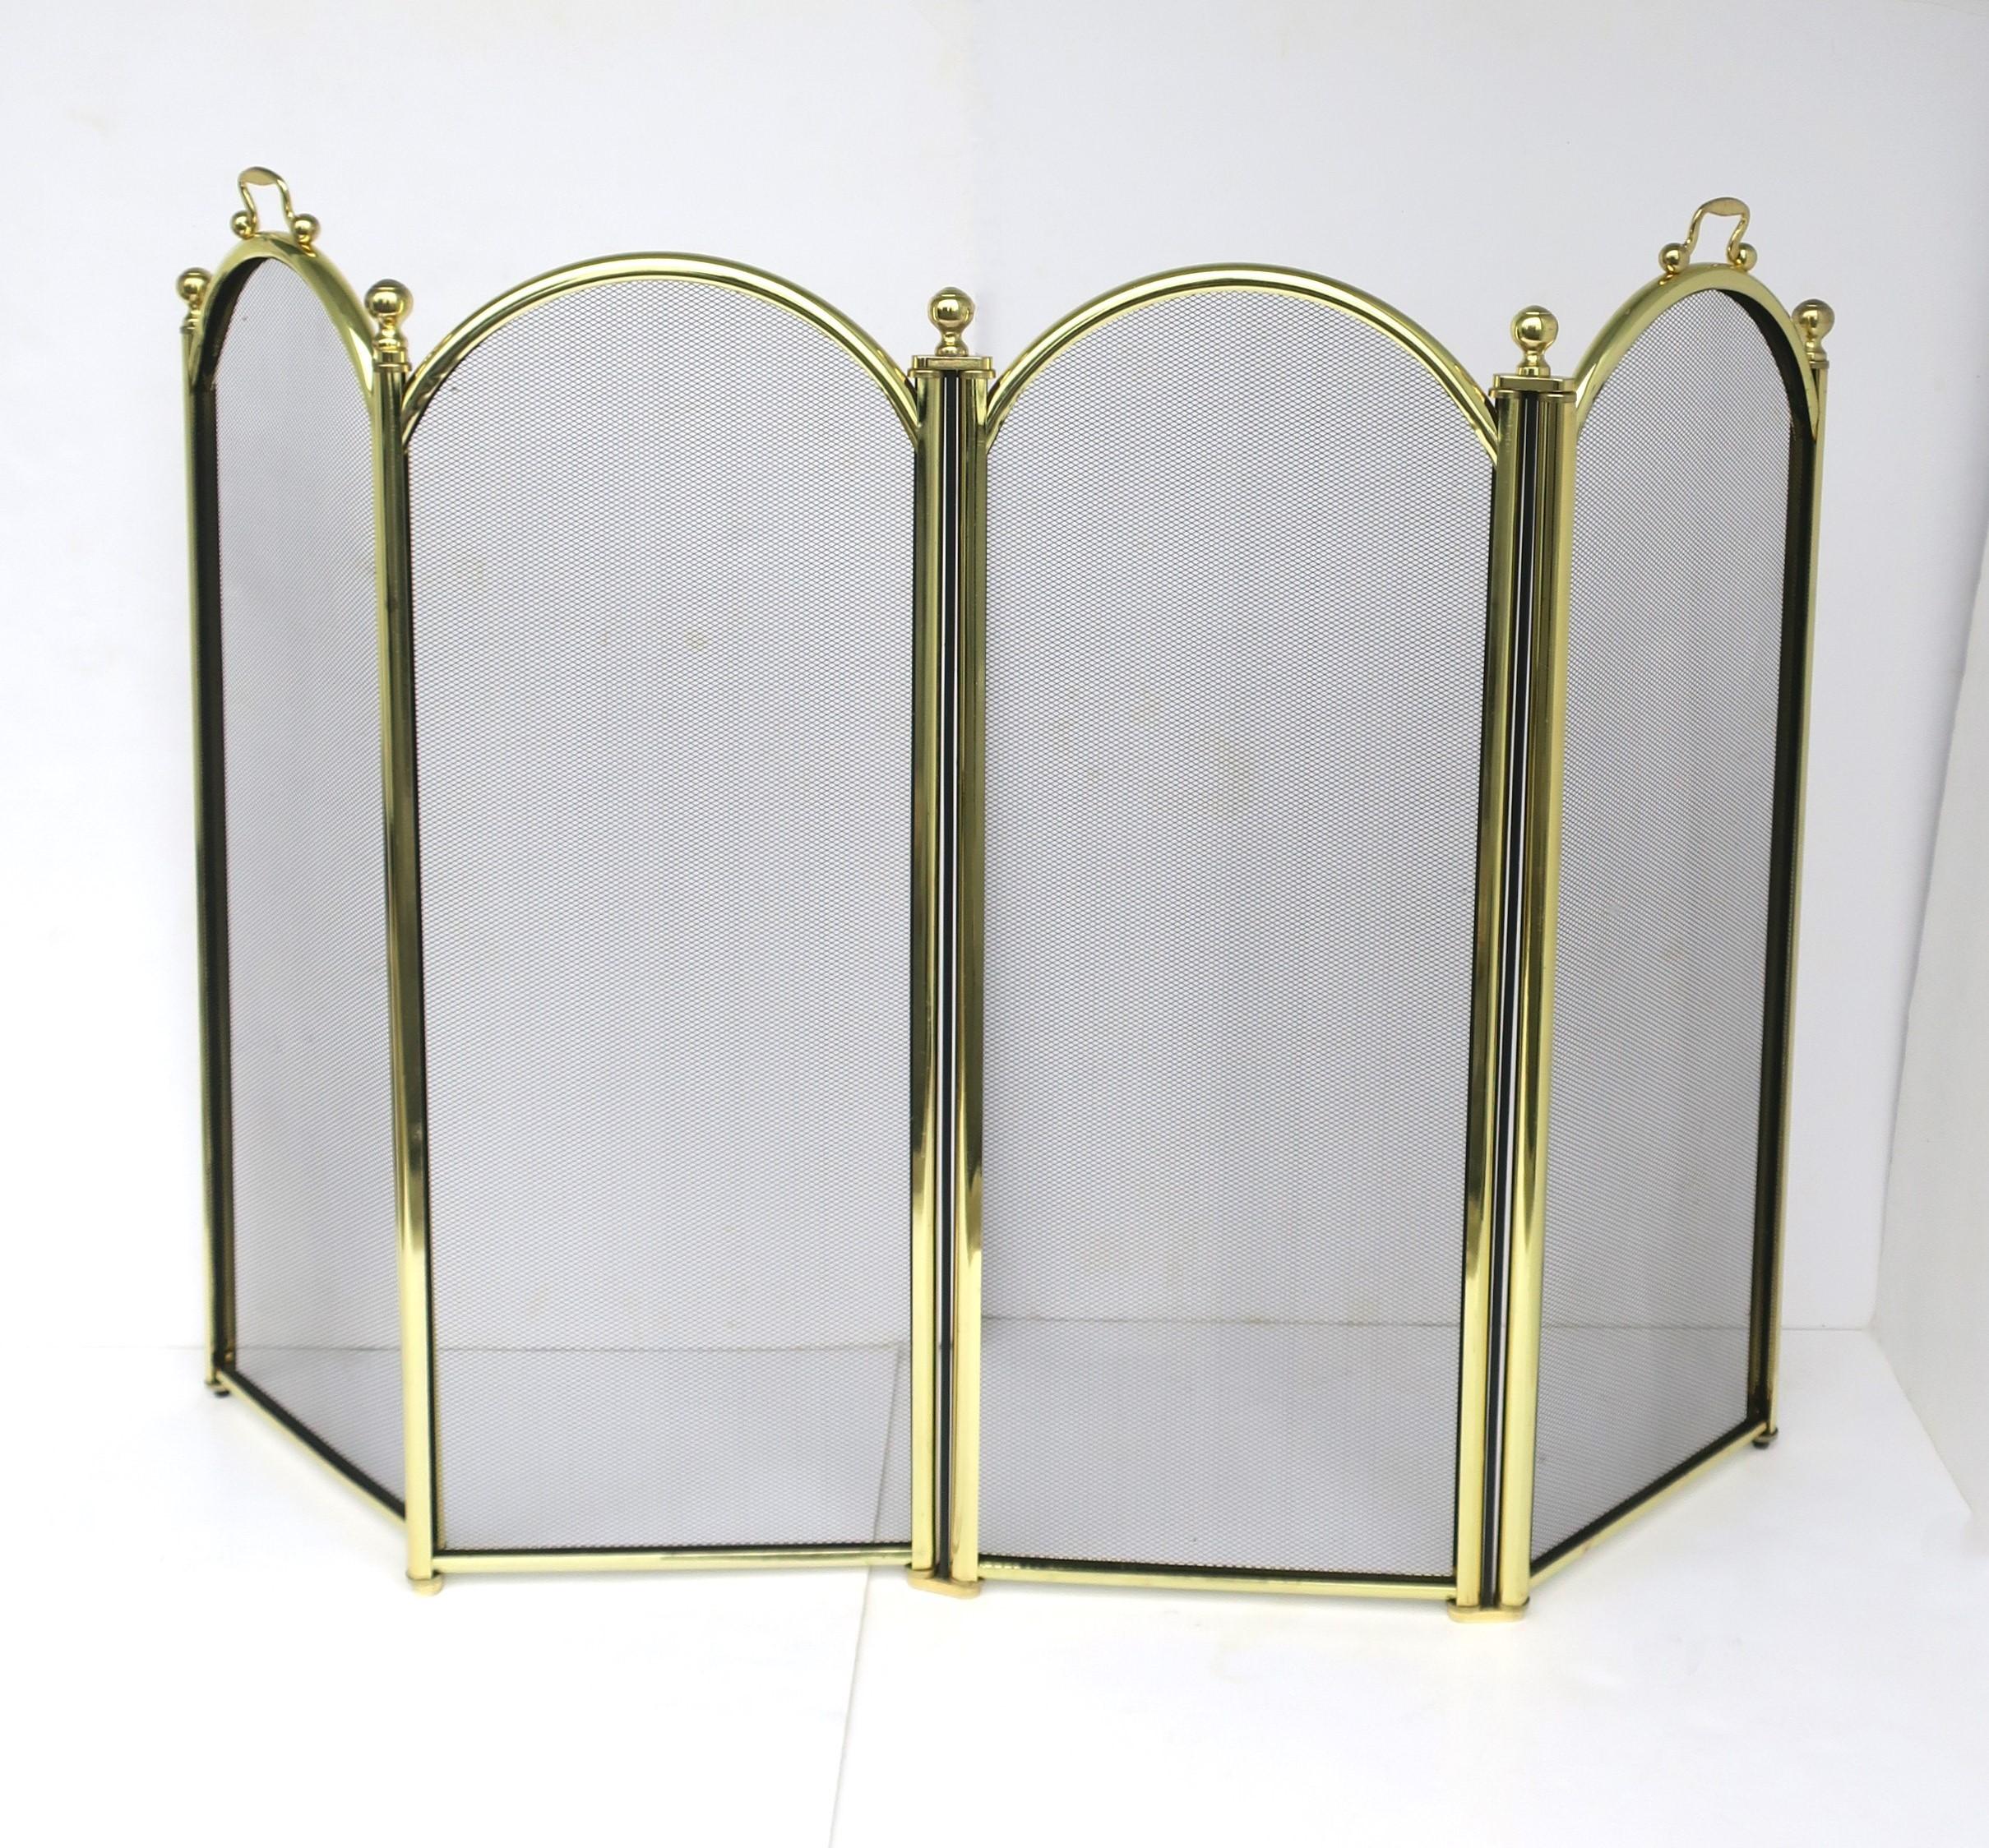 A brass-tone anodized metal fireplace screen with black metal mesh, circa late-20th century. Screen has four panels with black mesh screens, round ball finial details, and handles for easy lifting. Piece folds up nicely as shown. Screen appears to